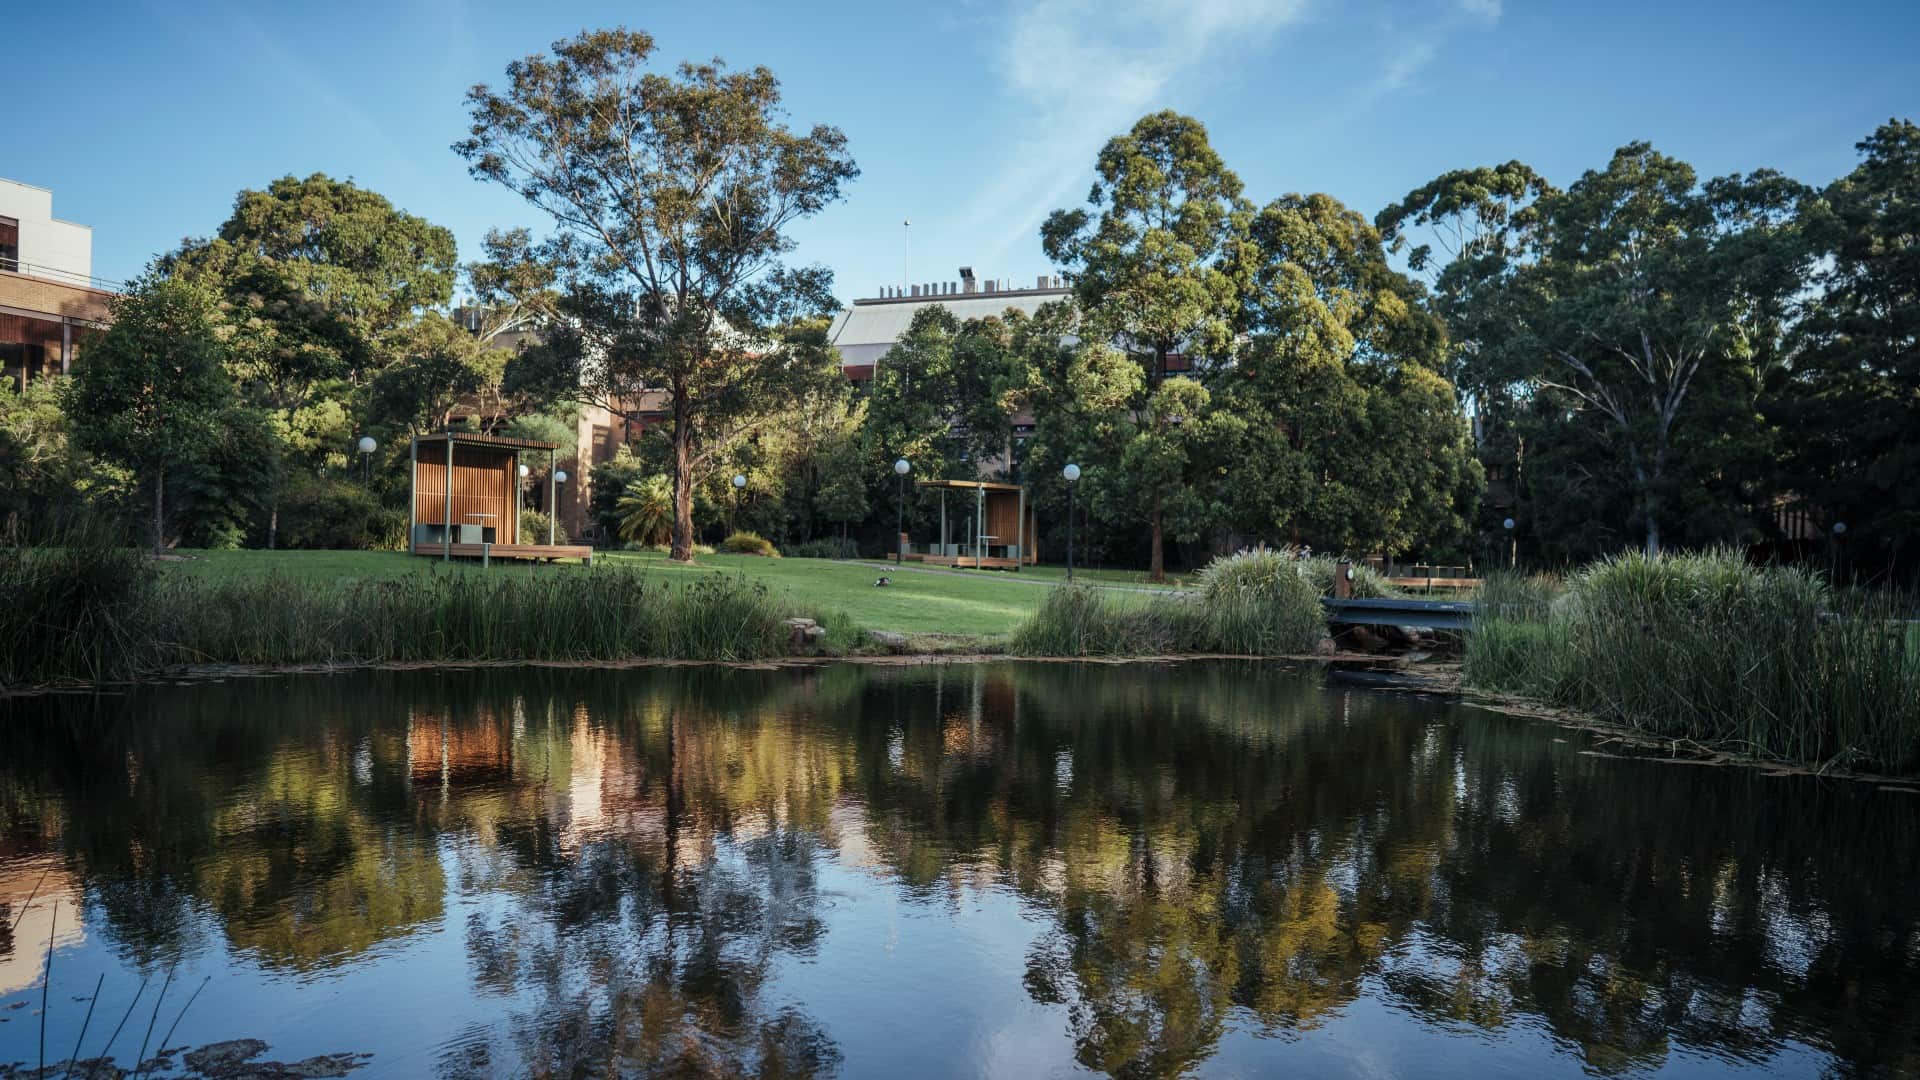 An image of the pond outside of Building 41 on UOW's Wollongong Campus. The Building is reflected in the water of the pond. Photo: Aristo Risi